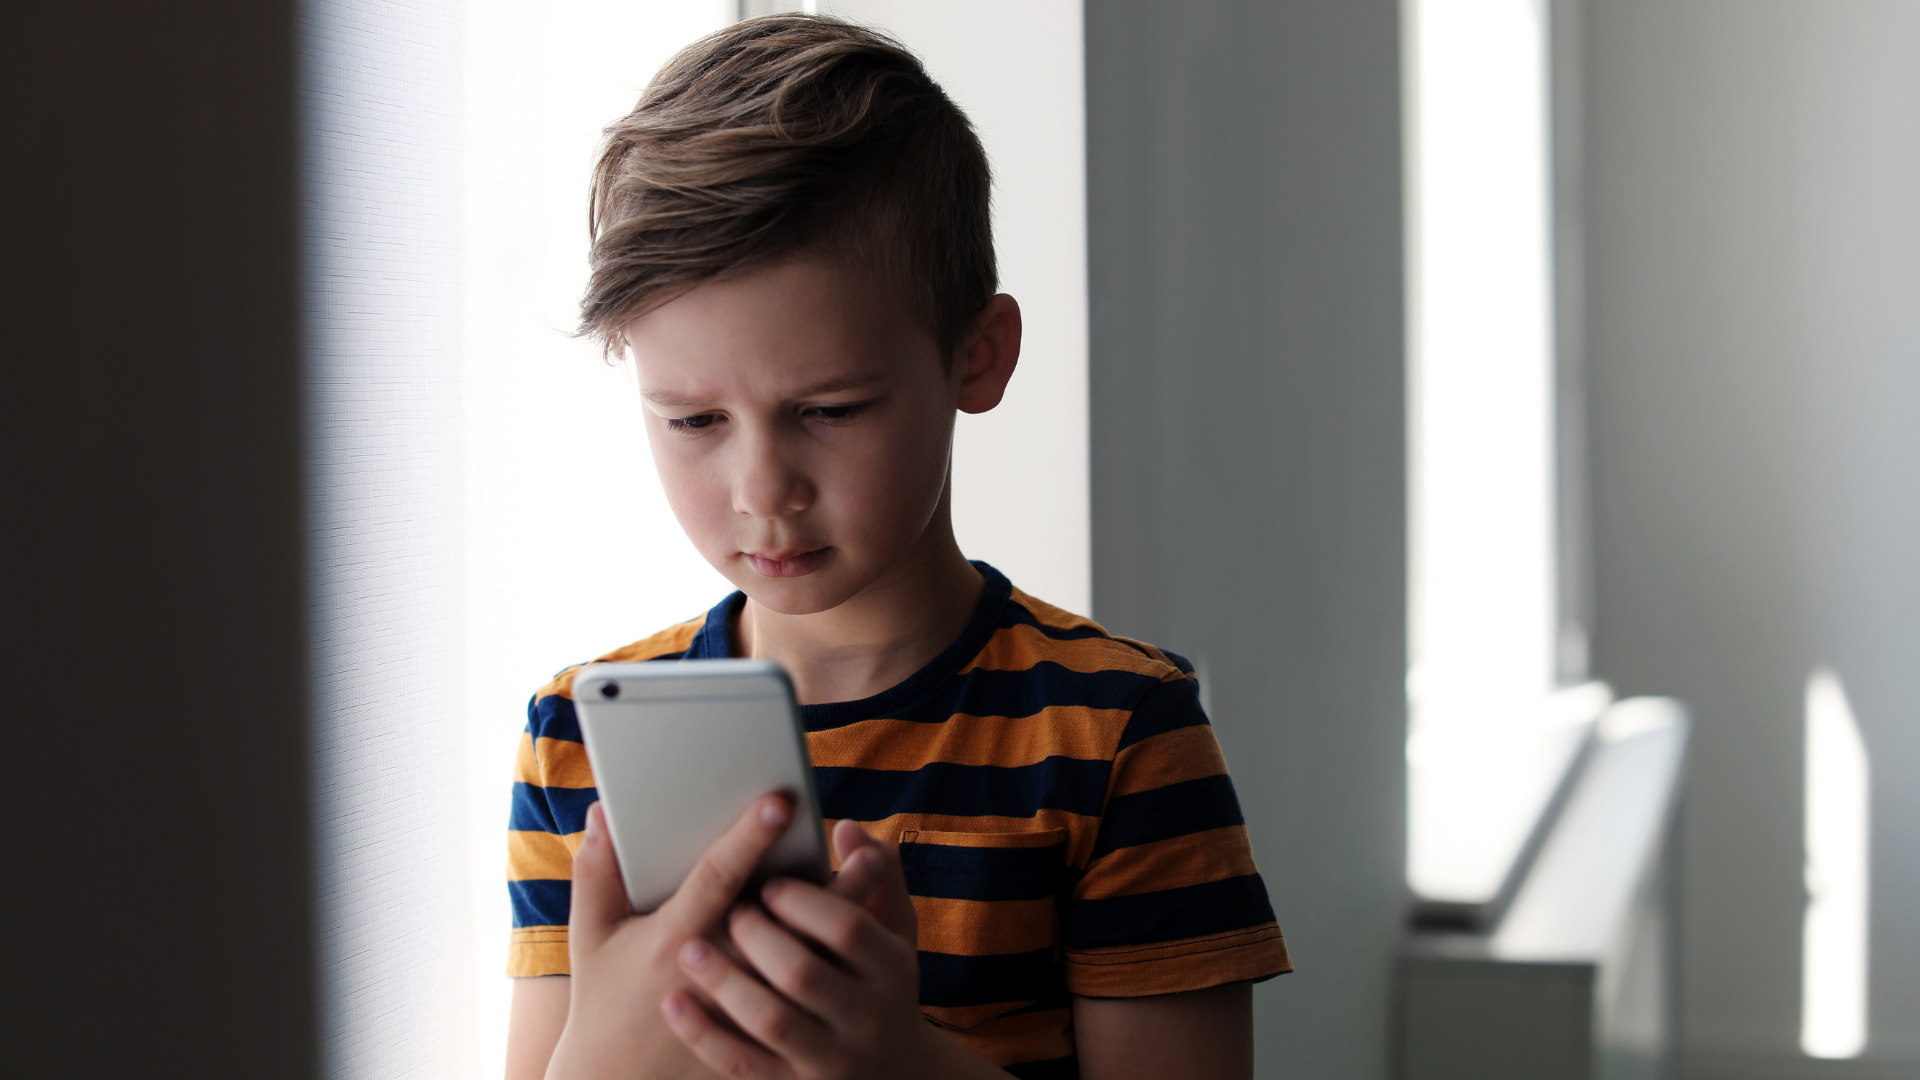 Ohio Federal Judge Puts Pause on Social Media Law Requiring Parental Consent for Kids’ Accounts